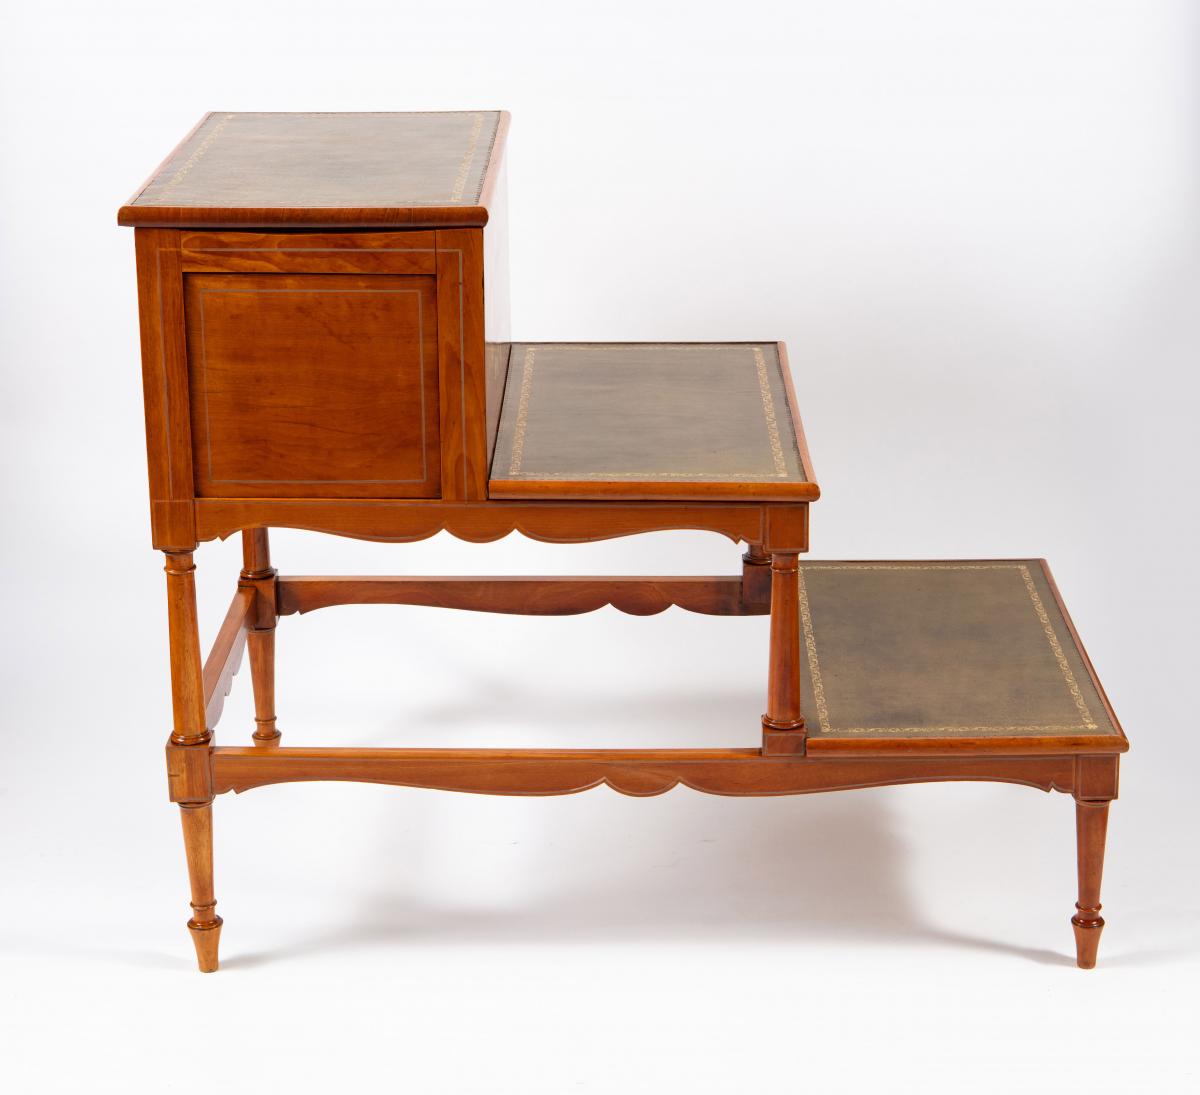 A pair of George III satinwood and painted bedsteps, attributed to Seddon, Sons & Shackleton